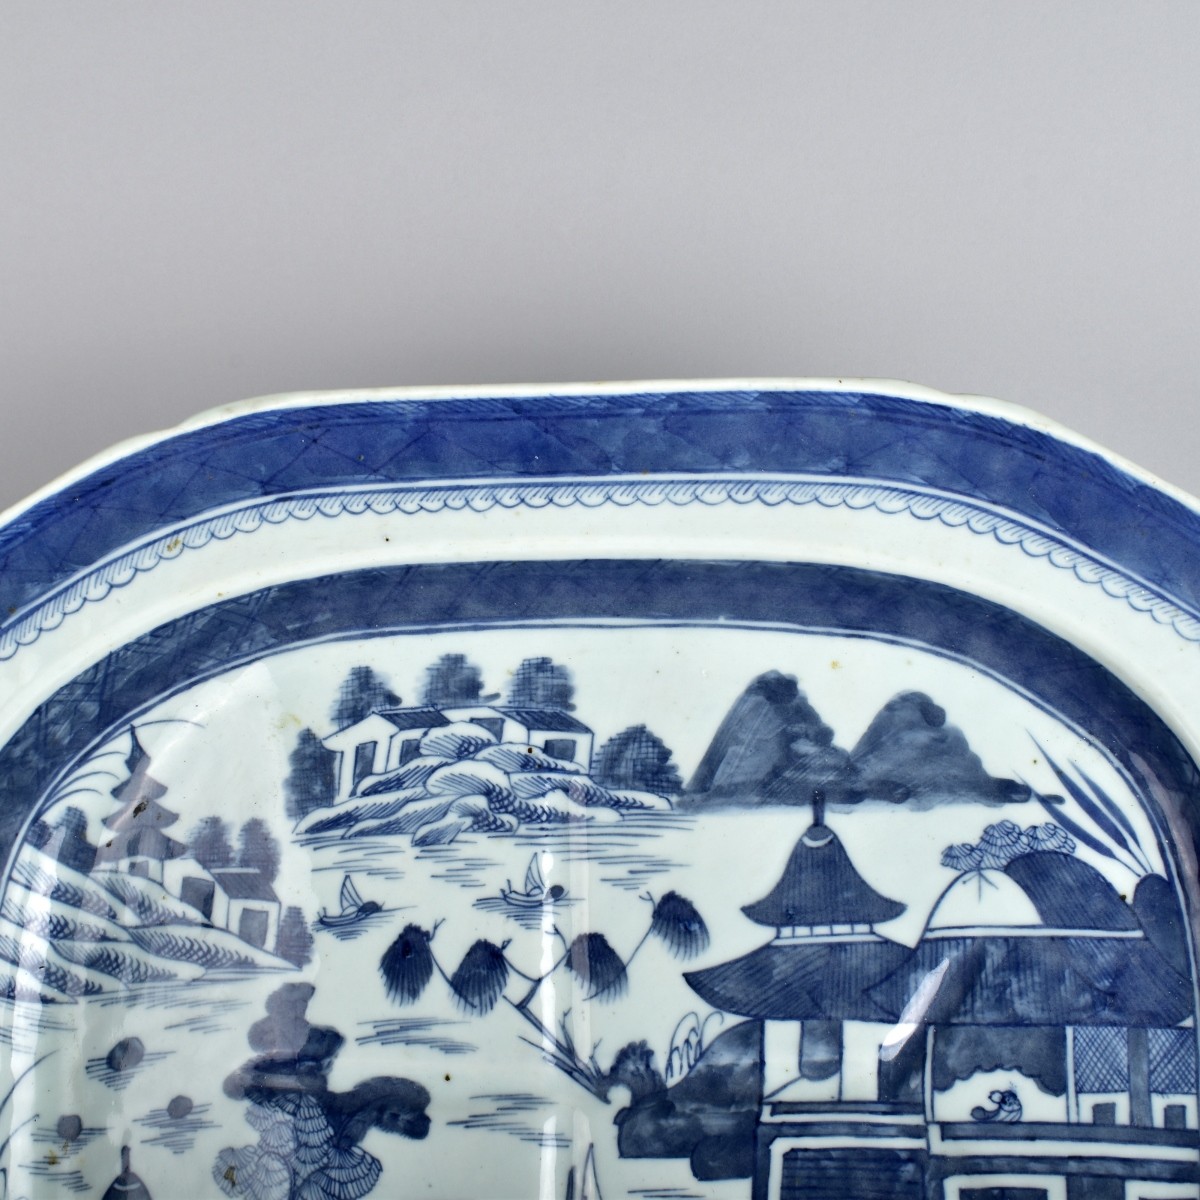 Large Chinese Canton Footed Dish